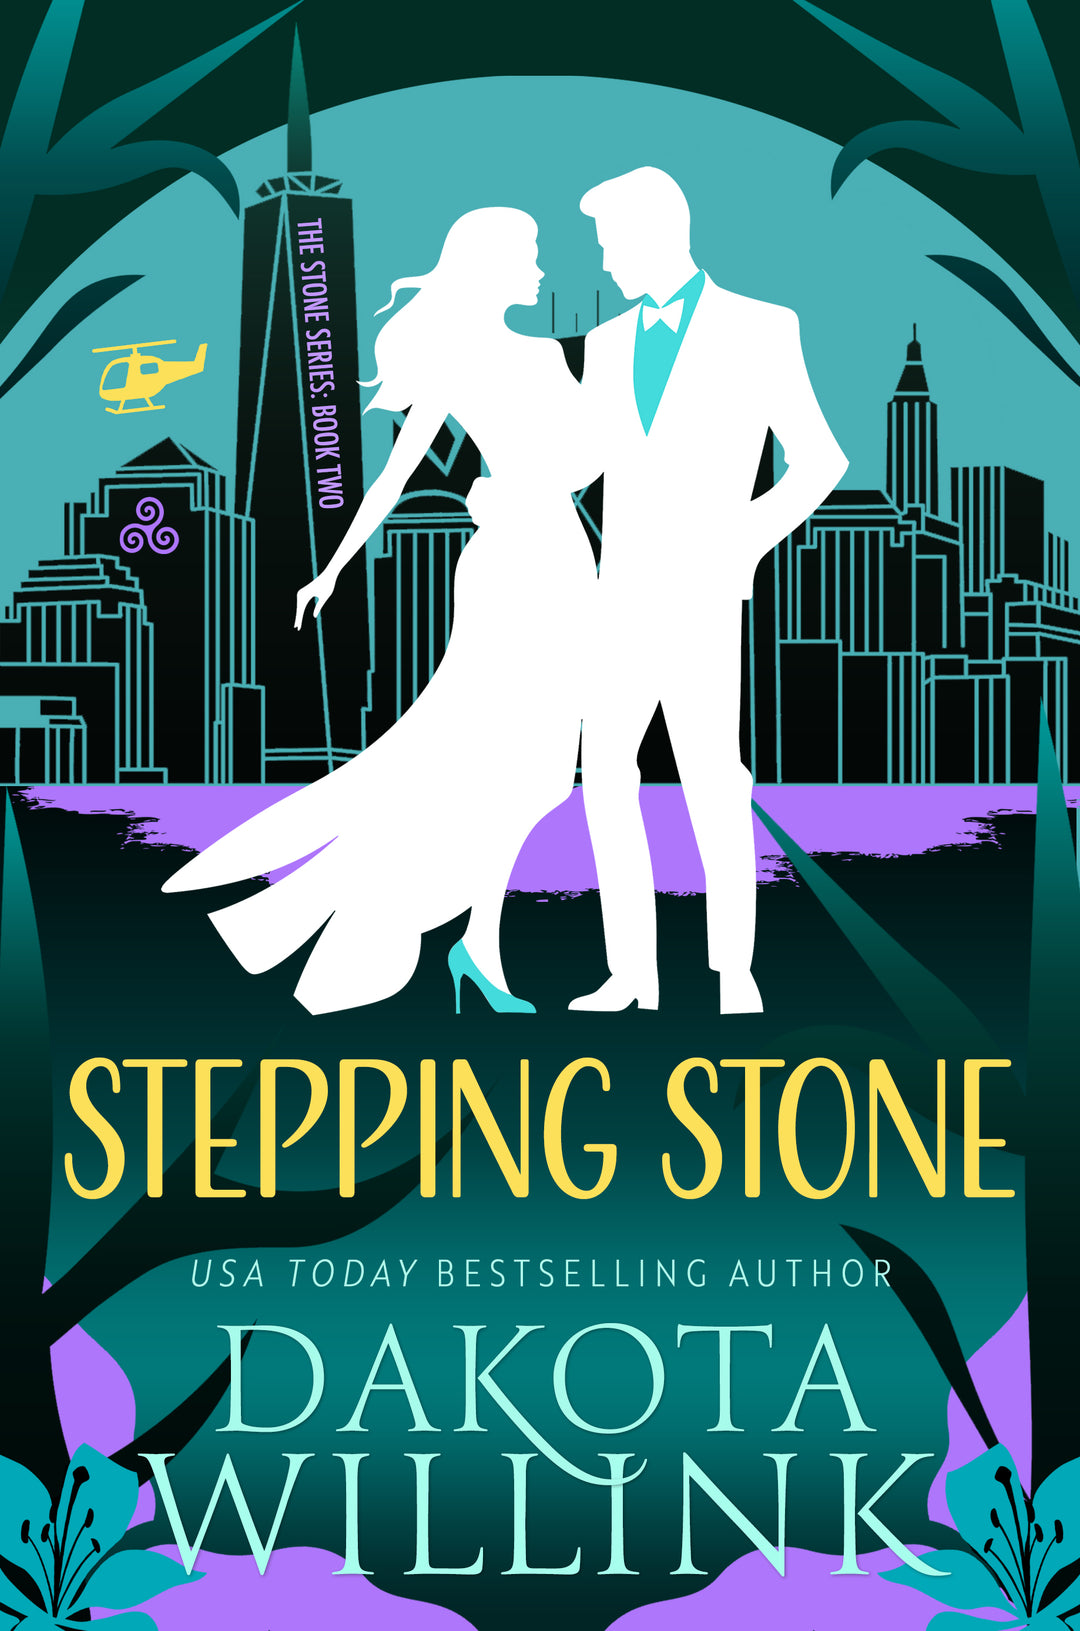 Stepping Stone (Clearance Hardcover, Full-Color Special Edition)